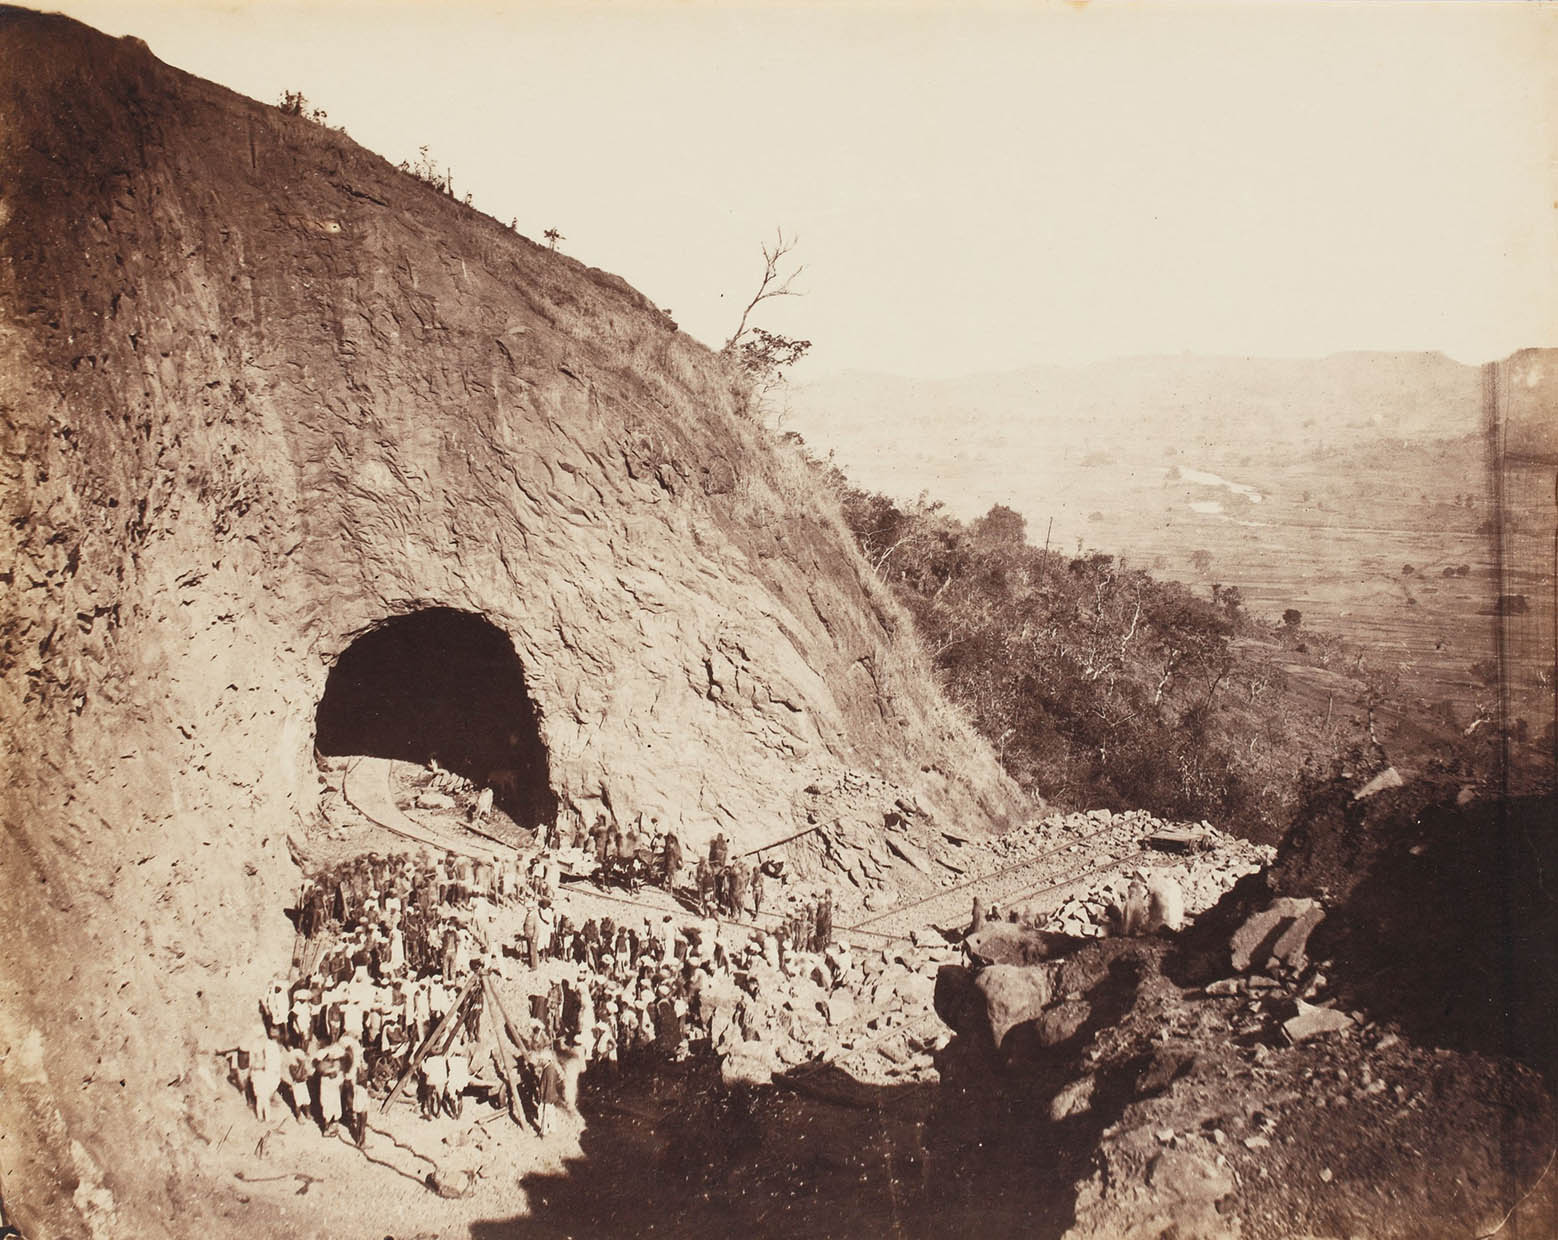 Tunnel Vision – An environmental history of Indian Railways - Alice Tredwell, Echoes of the Land, Environment, featured, Railway, Samuel Bourne, trains